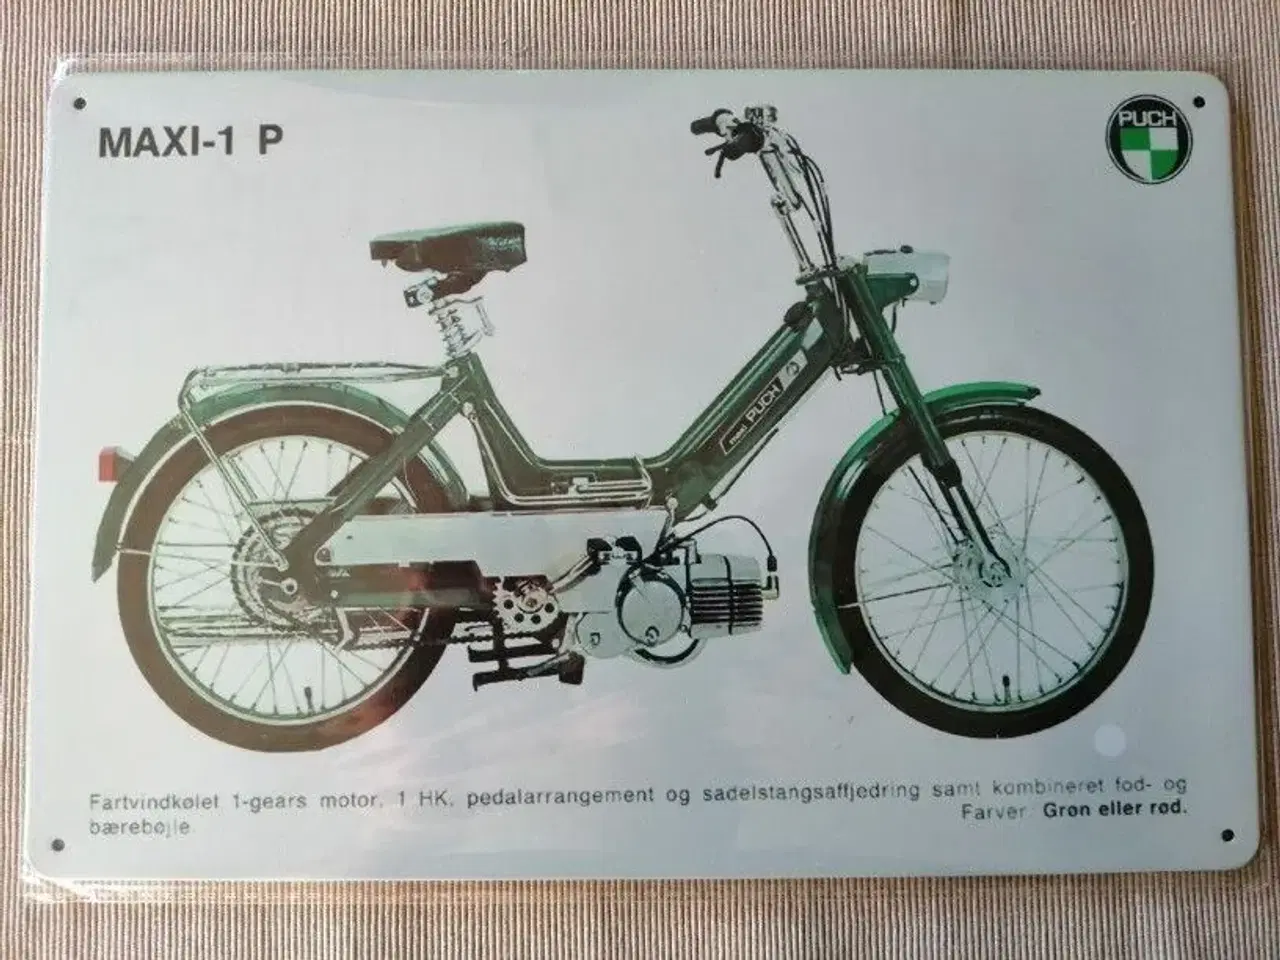 Billede 12 - puch maxi, puch mz50, puch monza juvel, puch ms50 